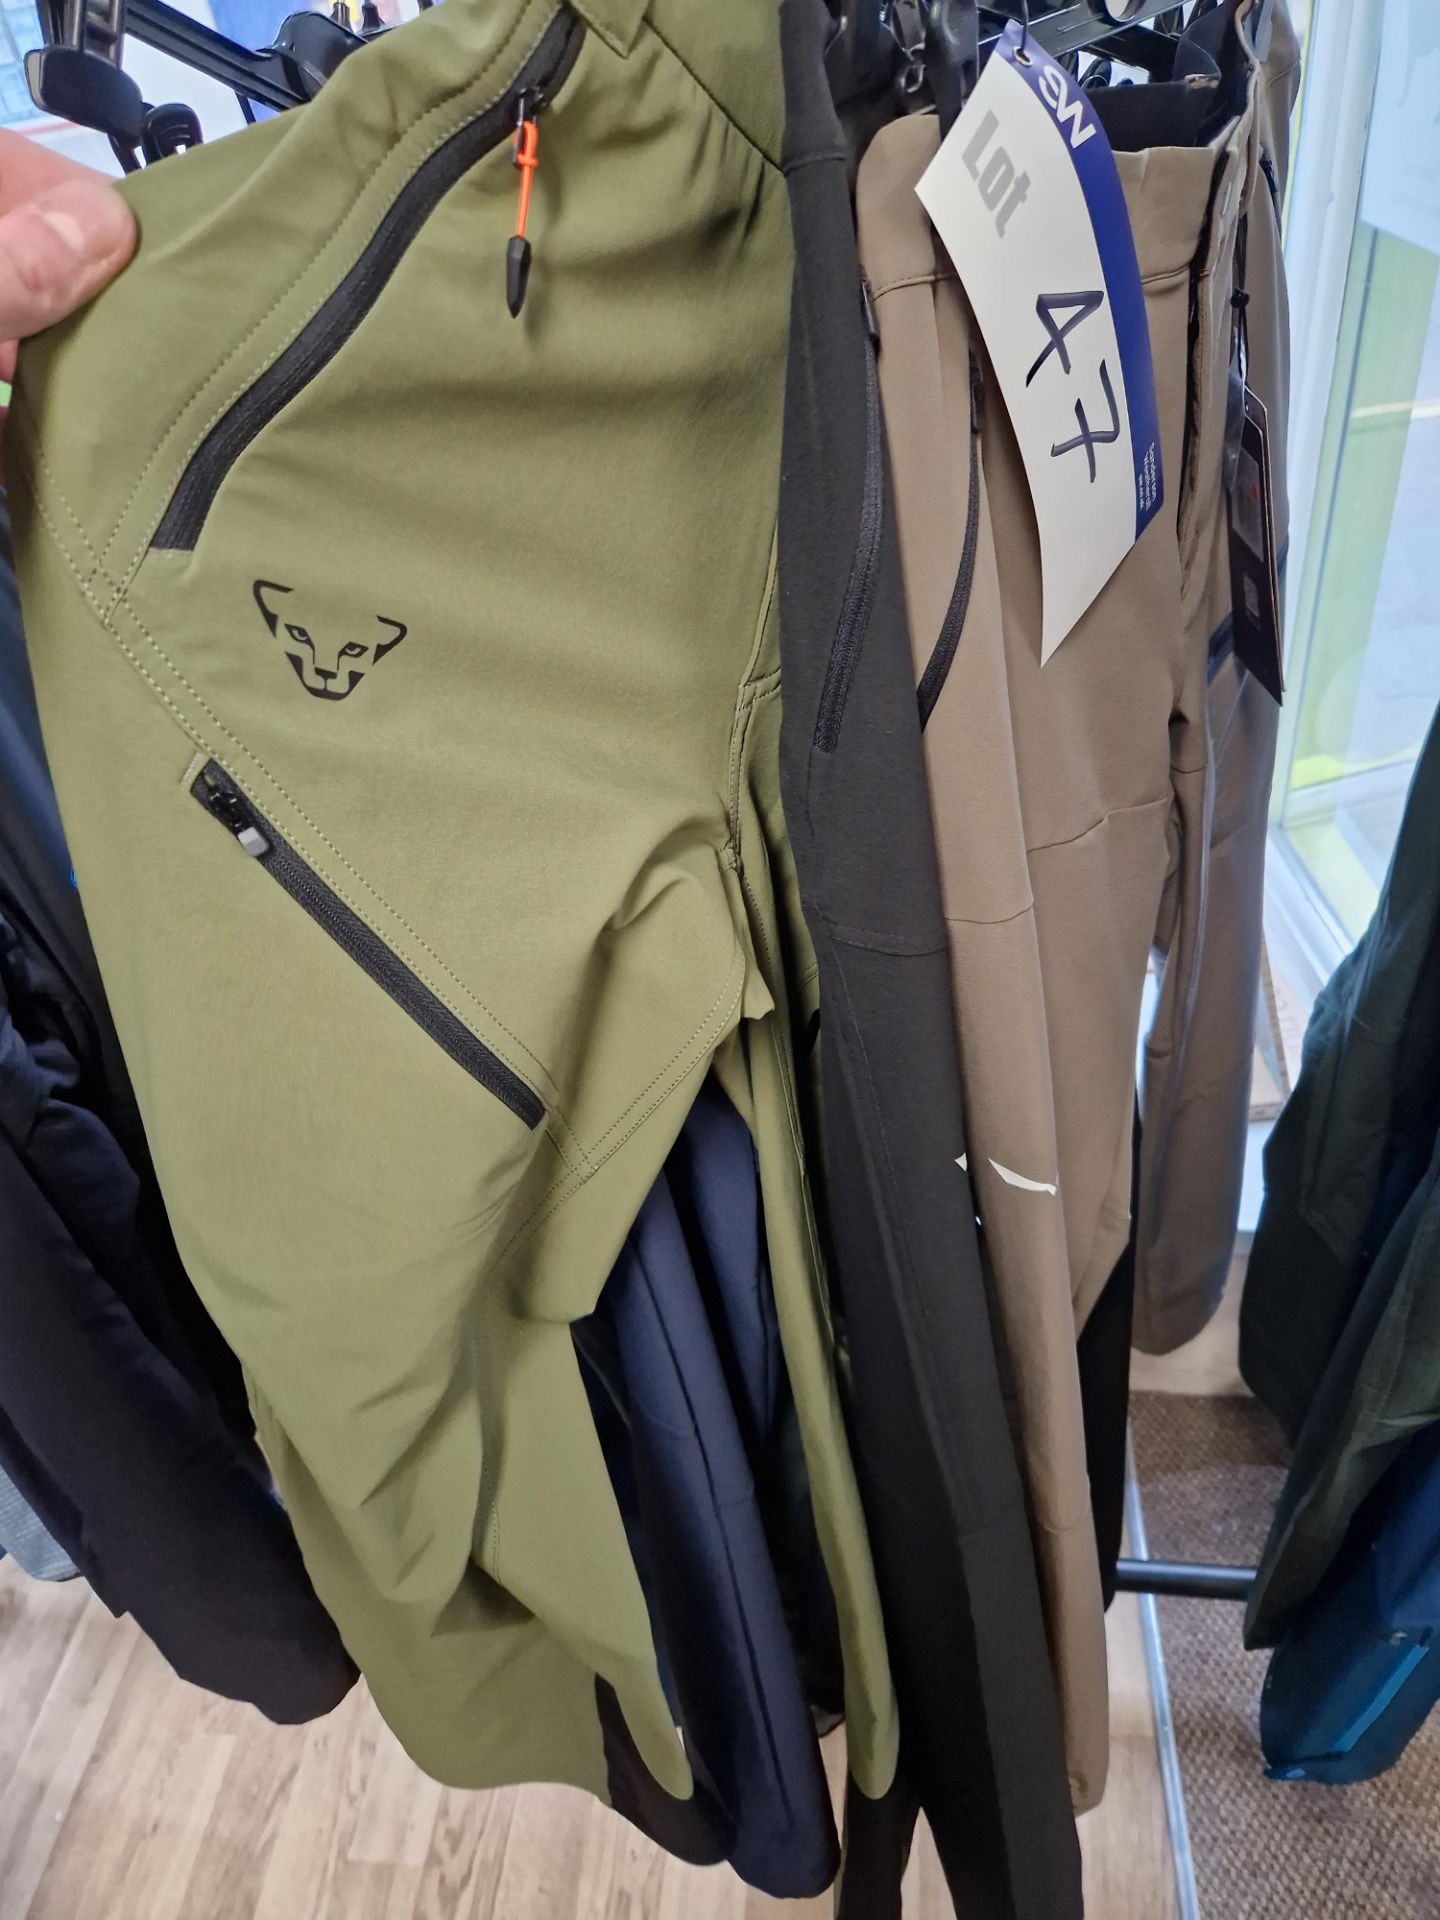 Three Salewa Terminal / Puez Dolomitic Trousers, Colours: Bungie Cord / Black Out / Navy, Sizes: S - Image 3 of 4